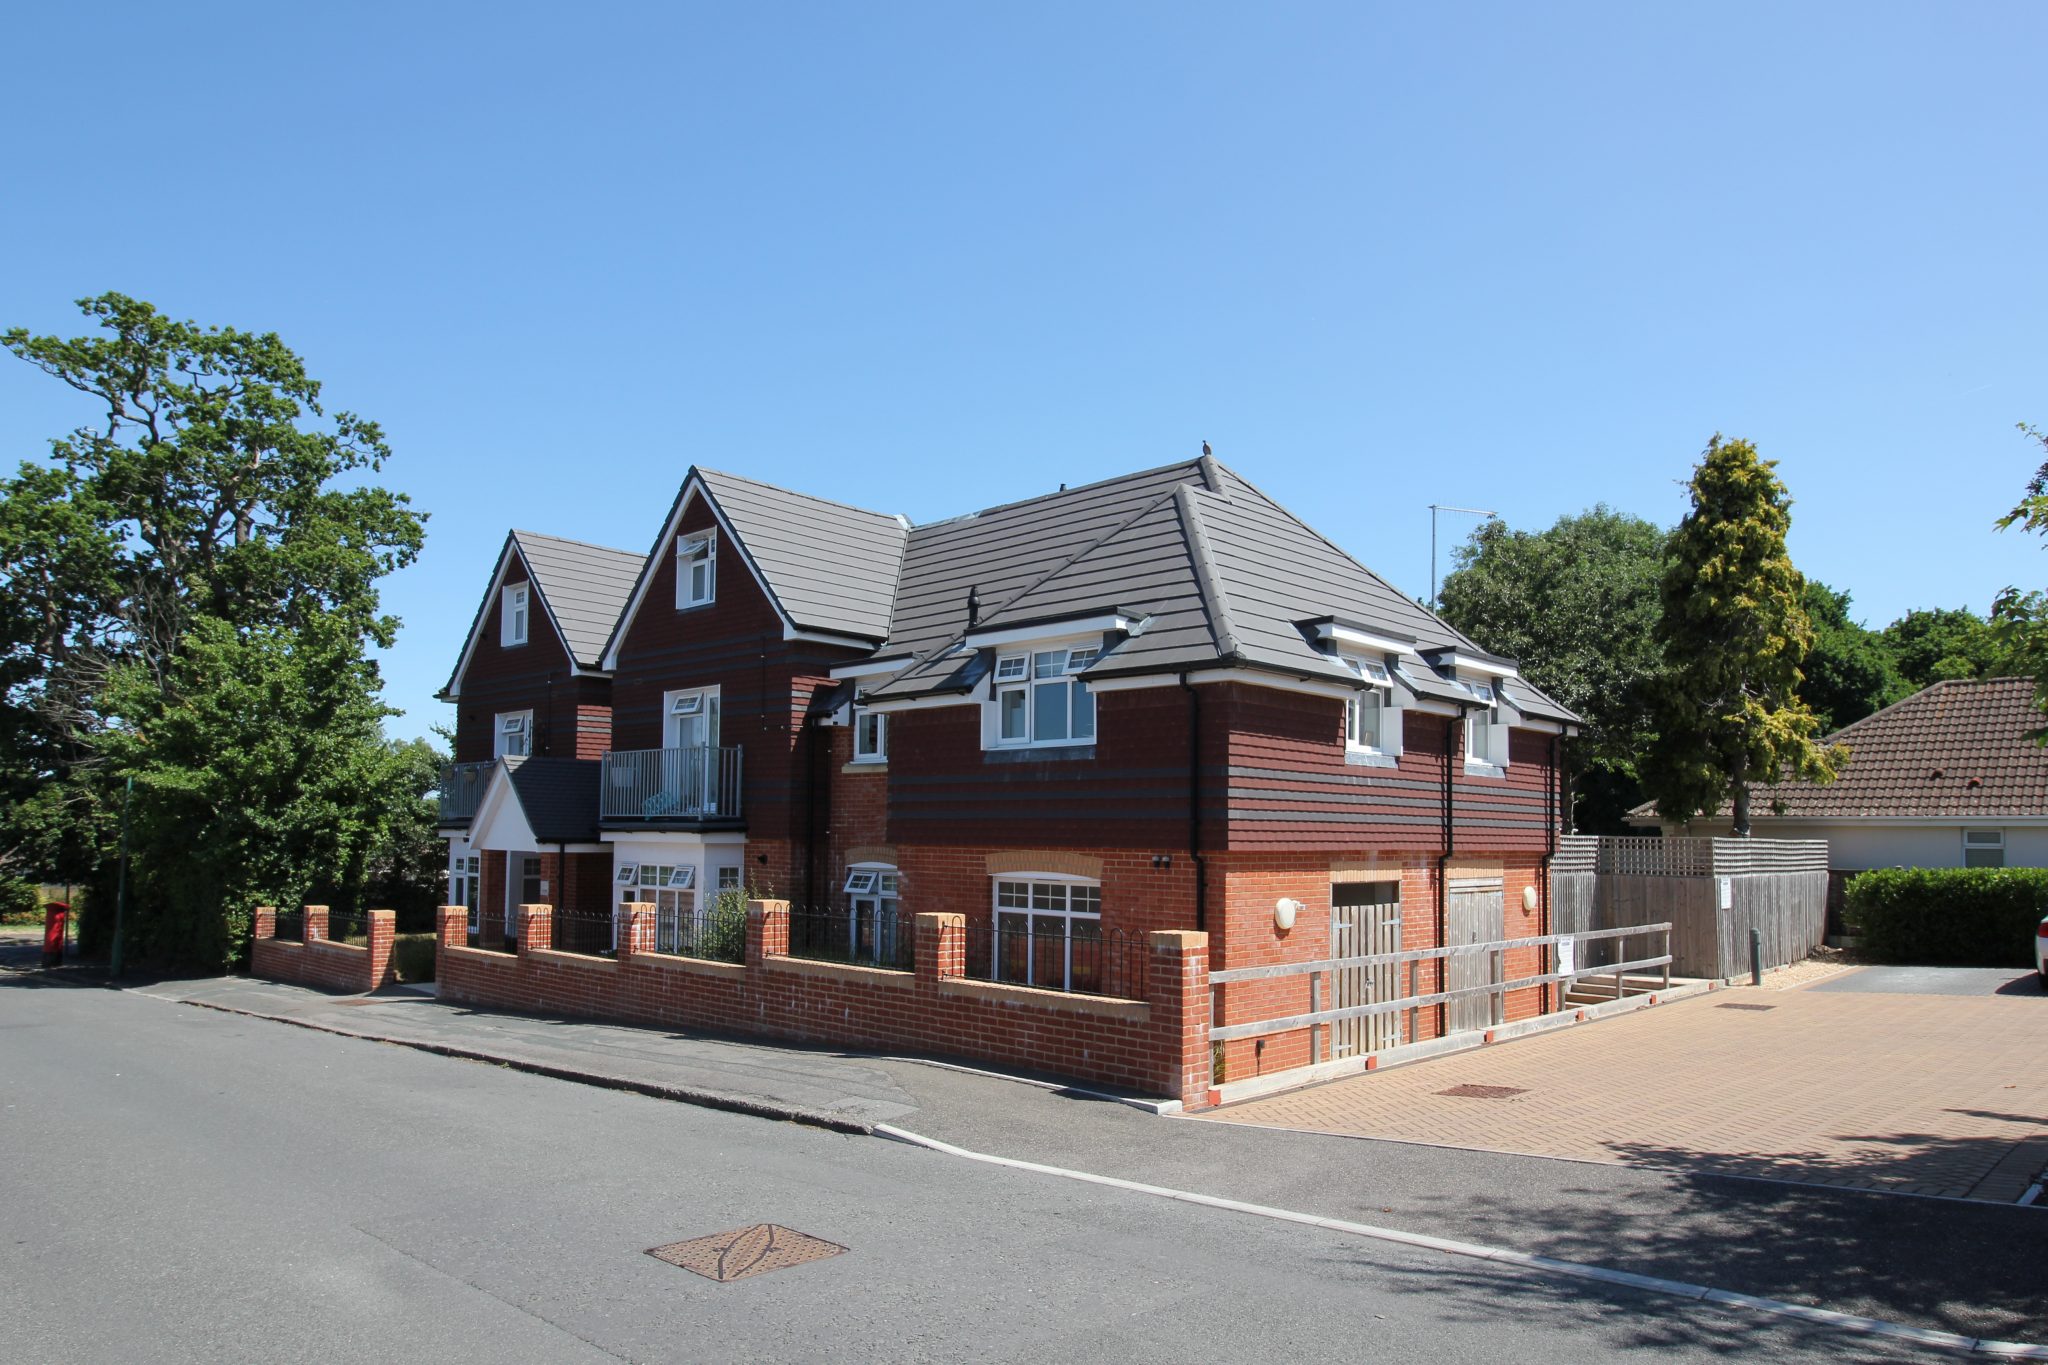 2 bedroom flats in Northbourne Bournemouth for sale